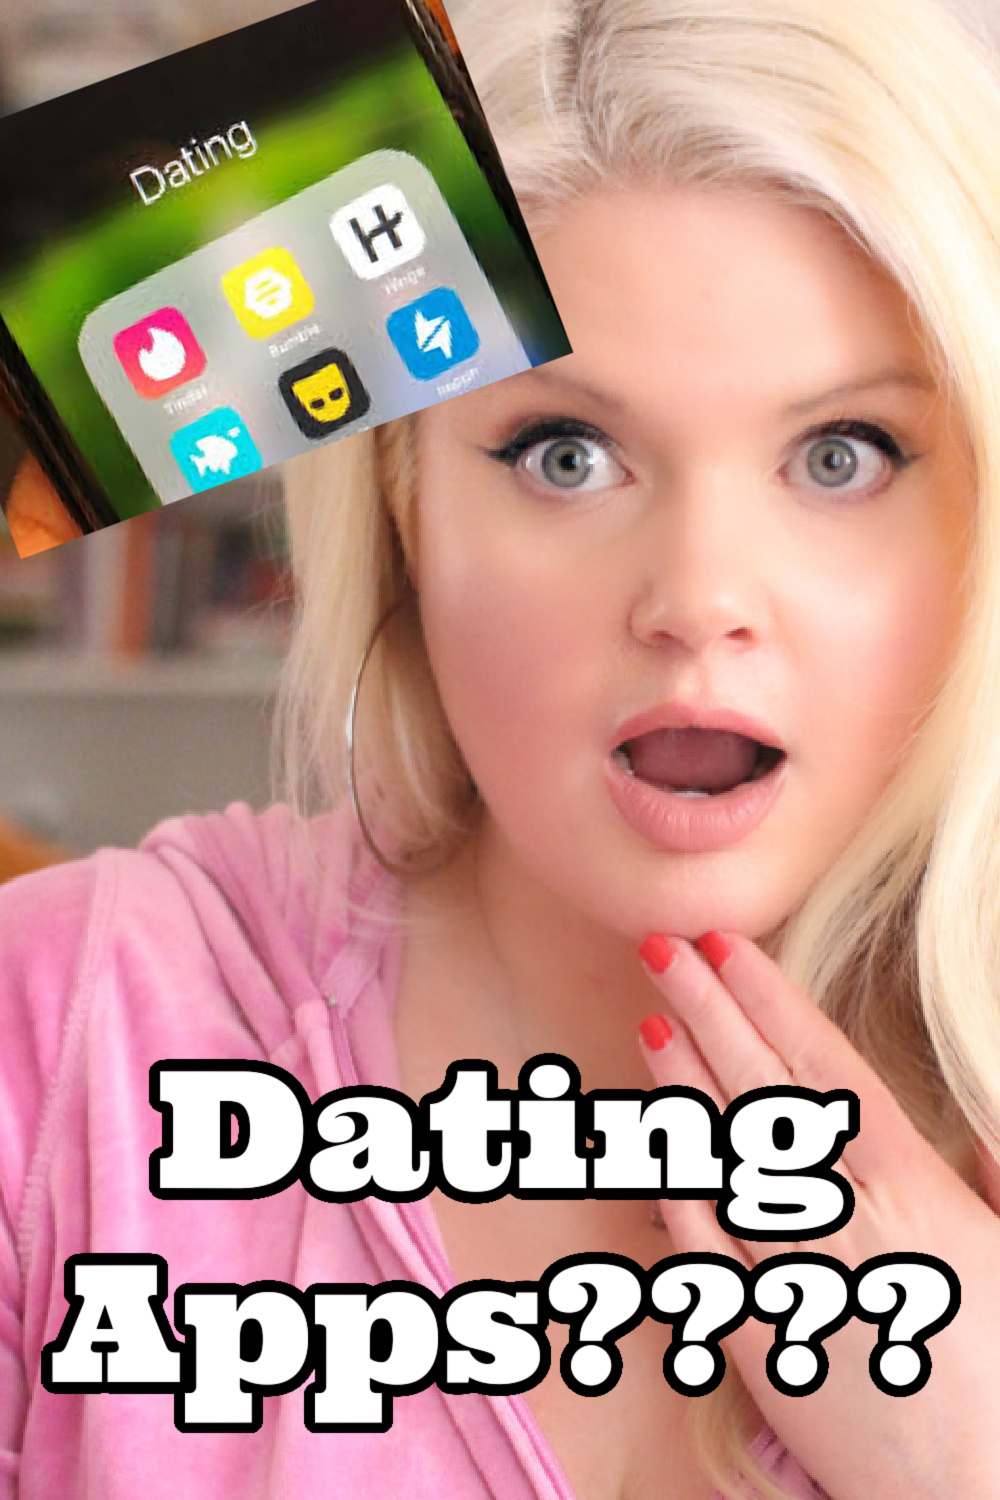 dating app dos and donts, dating profile tips for ladies, dating app tips for beginners, dating app photo tips, dating apps for serious relationships, dating app tips for guys, dating apps reviews 2022, sexual polarity in relationships, sexual polarity, sexual polarity masculine feminine, law of polarity in relationships, how to create polarity in relationships, how men attract a feminine partner, how to attract a feminine woman, should women pursue men, dating advice for men, dating advice for women, understanding masculine and feminine energy, feminine and masculine energy in relationships, difference between feminine and masculine energy, feminine and masculine energy traits, Everyday starlet, sarah blodgett,